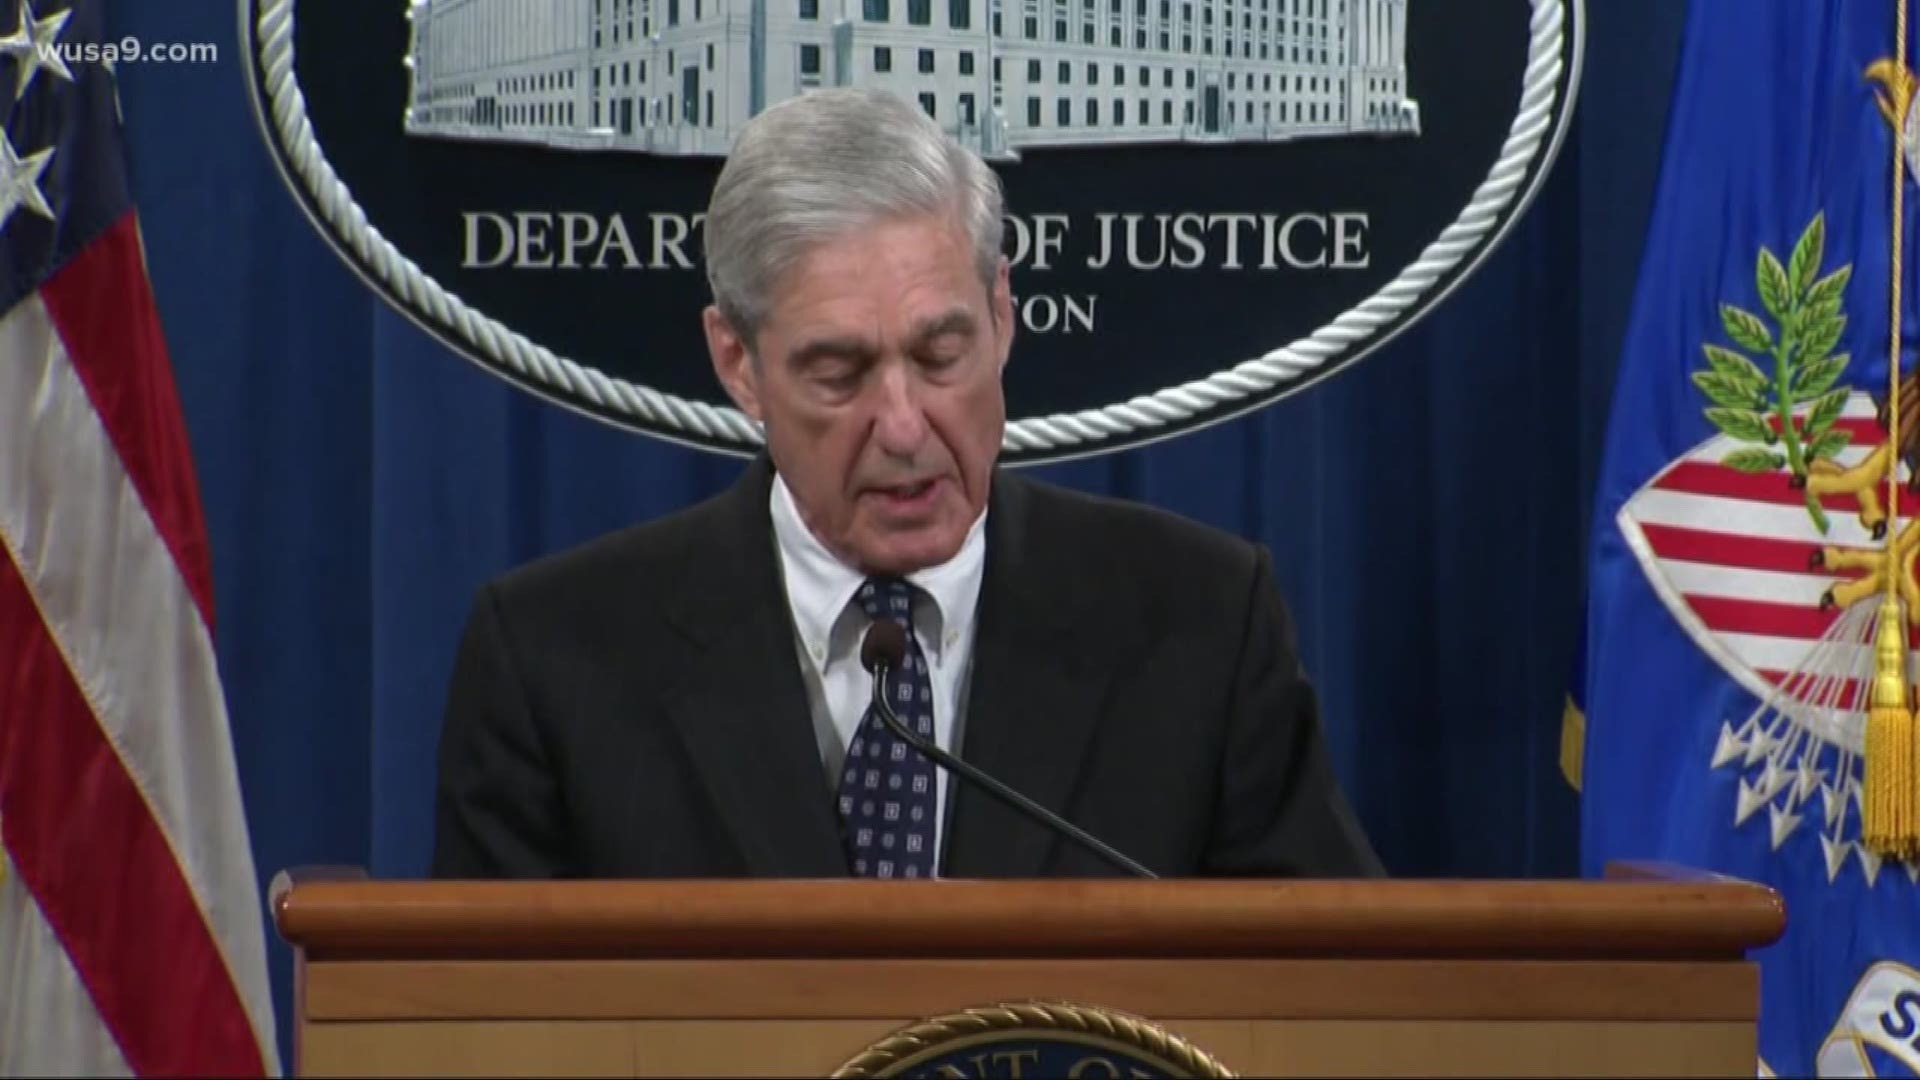 American University communications and political science professor Lenny Steinhorn says Special Council Robert Mueller implied that Congress should take evidence and "run with it."